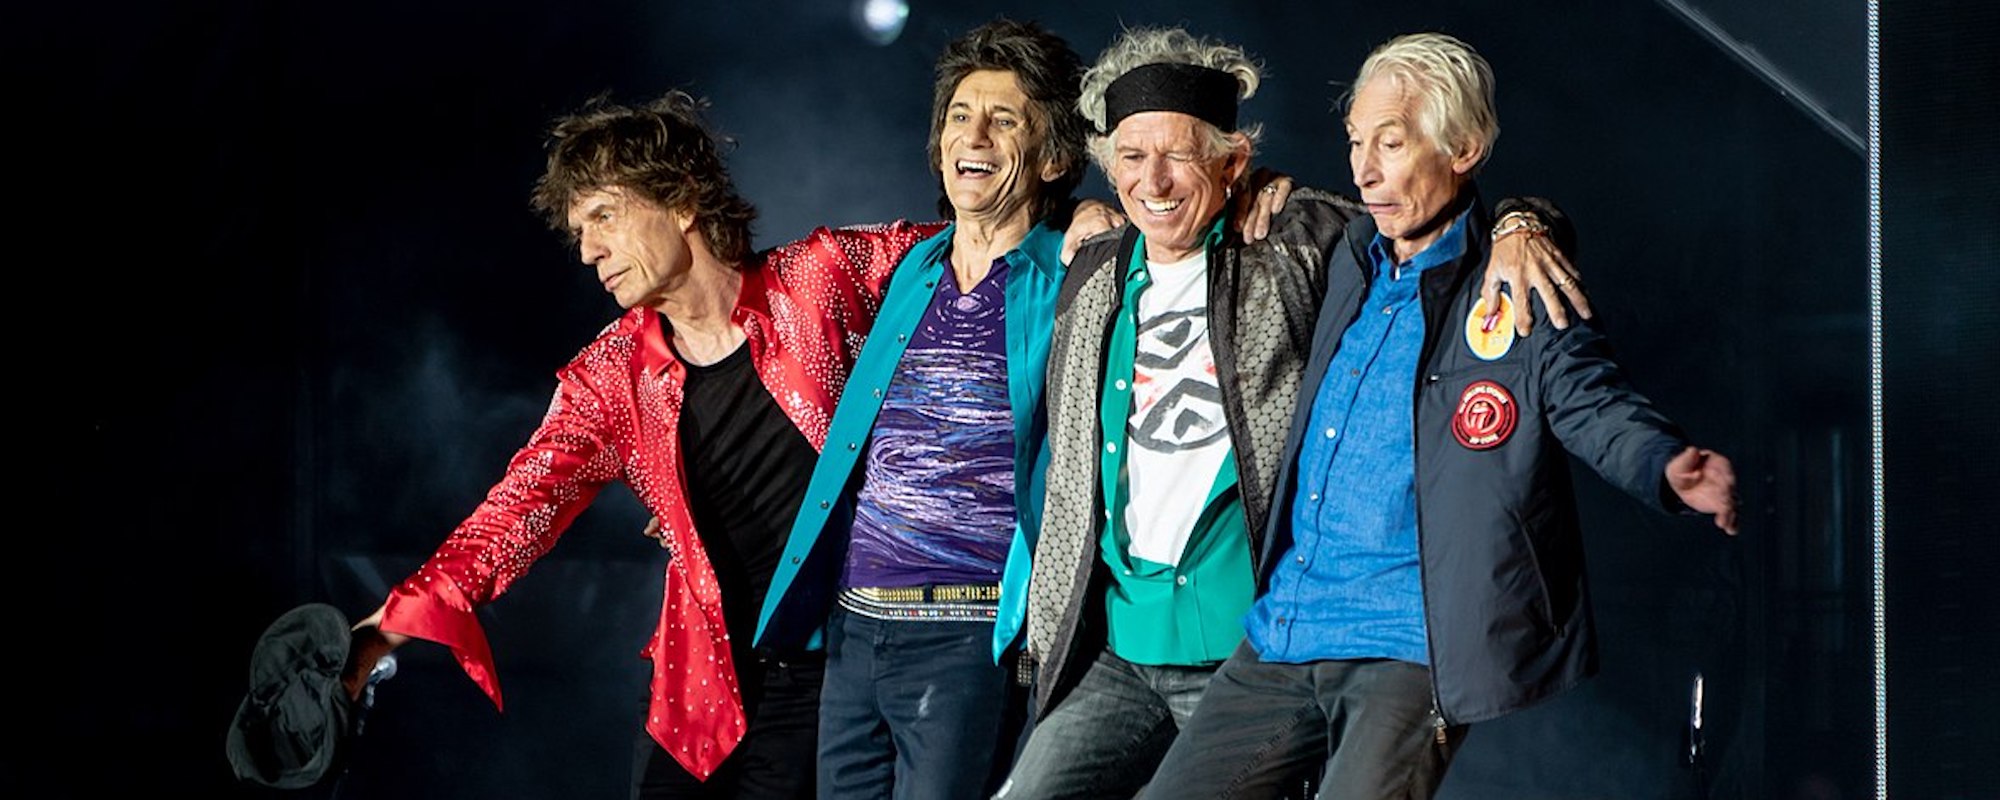 The Rolling Stones Reveal Video for “Living In the Heart of Love,” Honor Charlie Watts During First Show Back